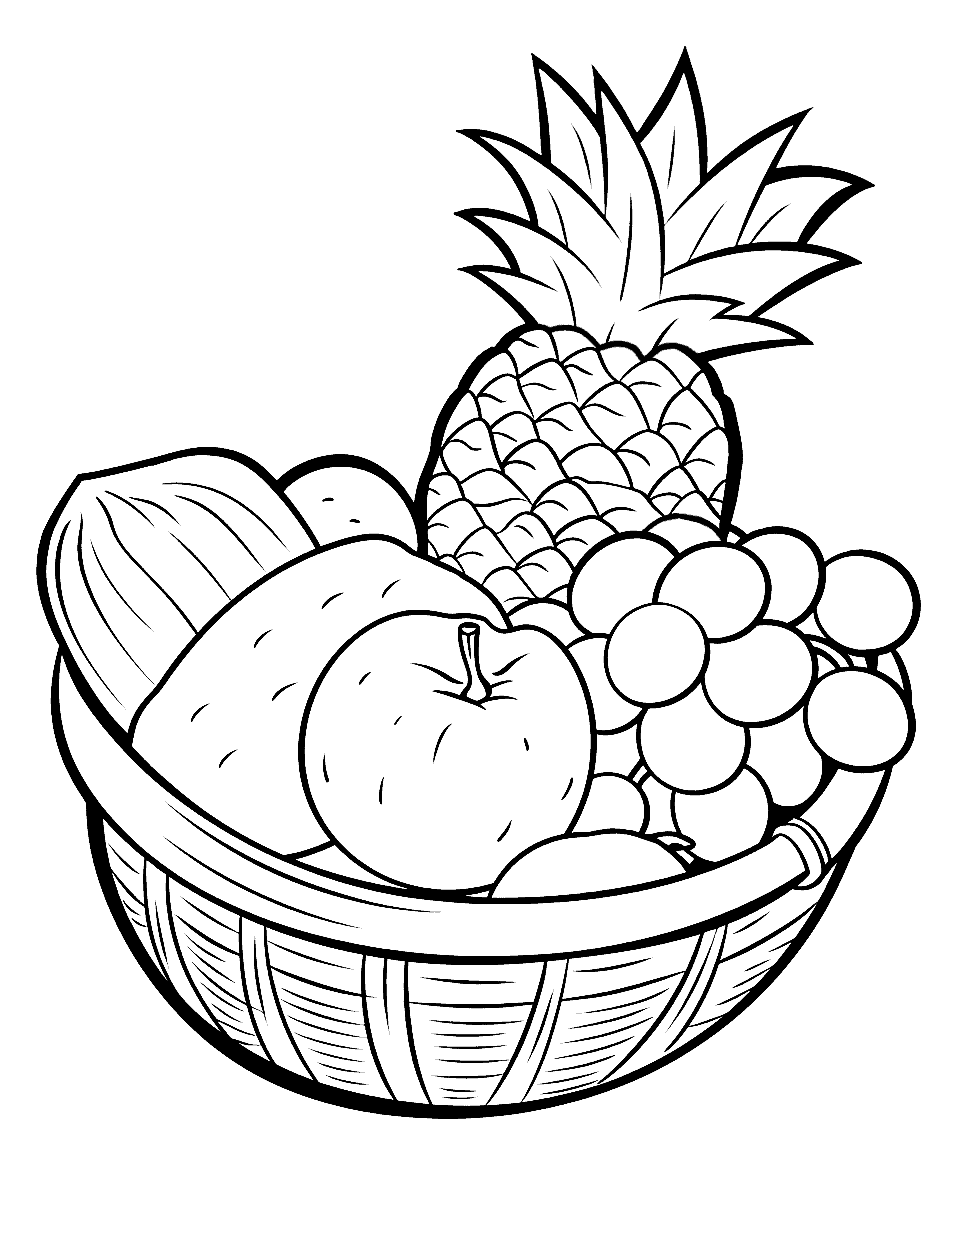 Toddler's Fruit Basket Coloring Page - A simple basket filled with various fruits, easy for toddlers to color.